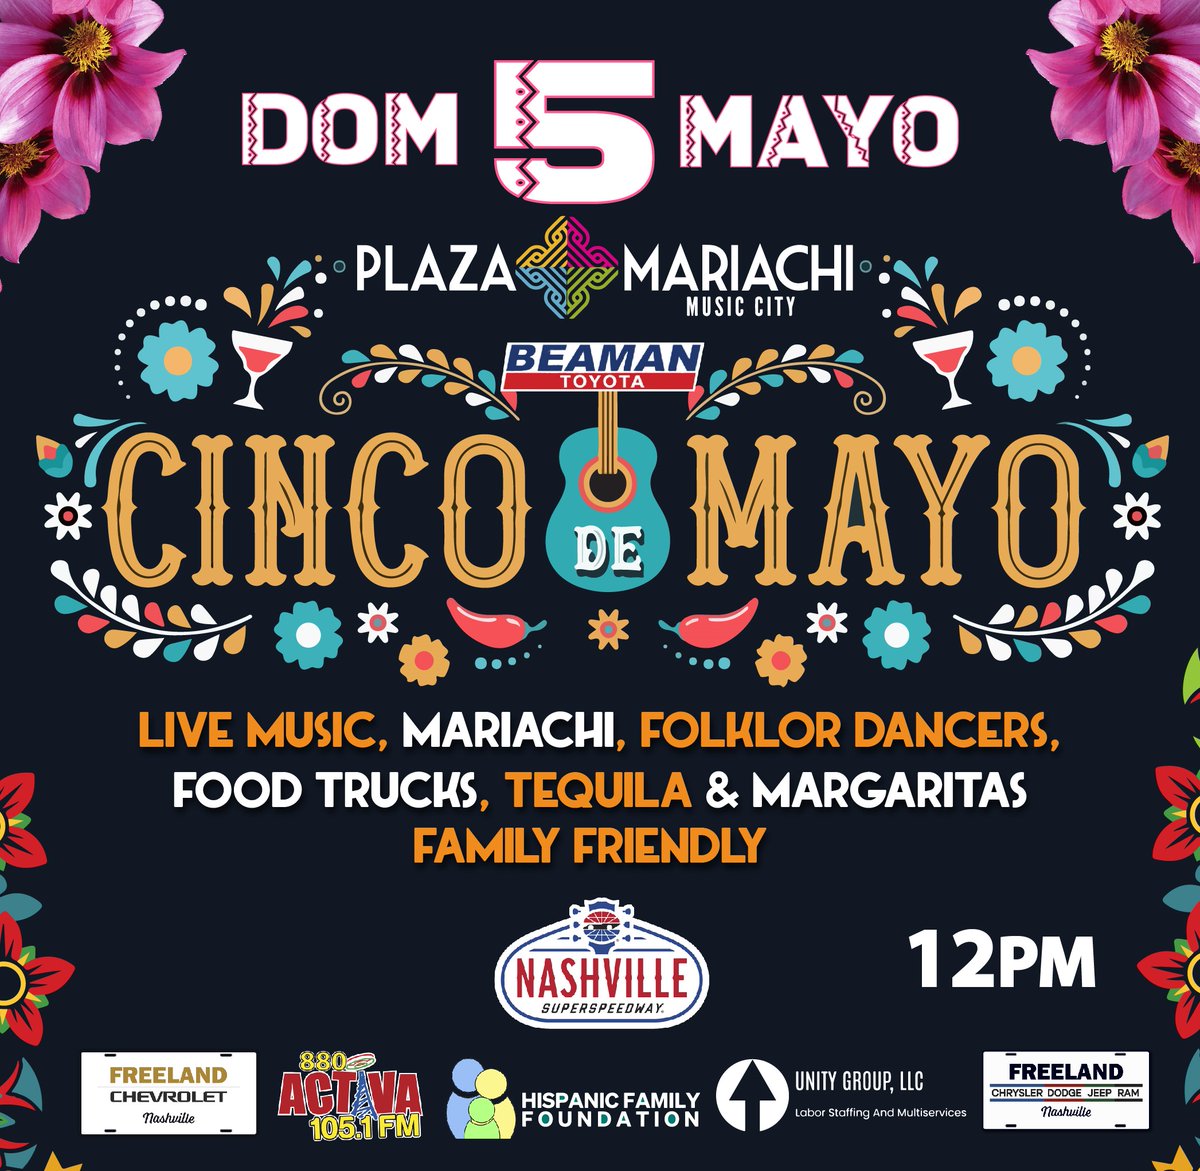 We are headed to Plaza Mariachi Music City for their Cinco de Mayo party! 🎊 Come find us and the pace car as we giveaway some sweet swag and tickets to the #Ally400! More info! ➡️ bit.ly/4dhfsSp